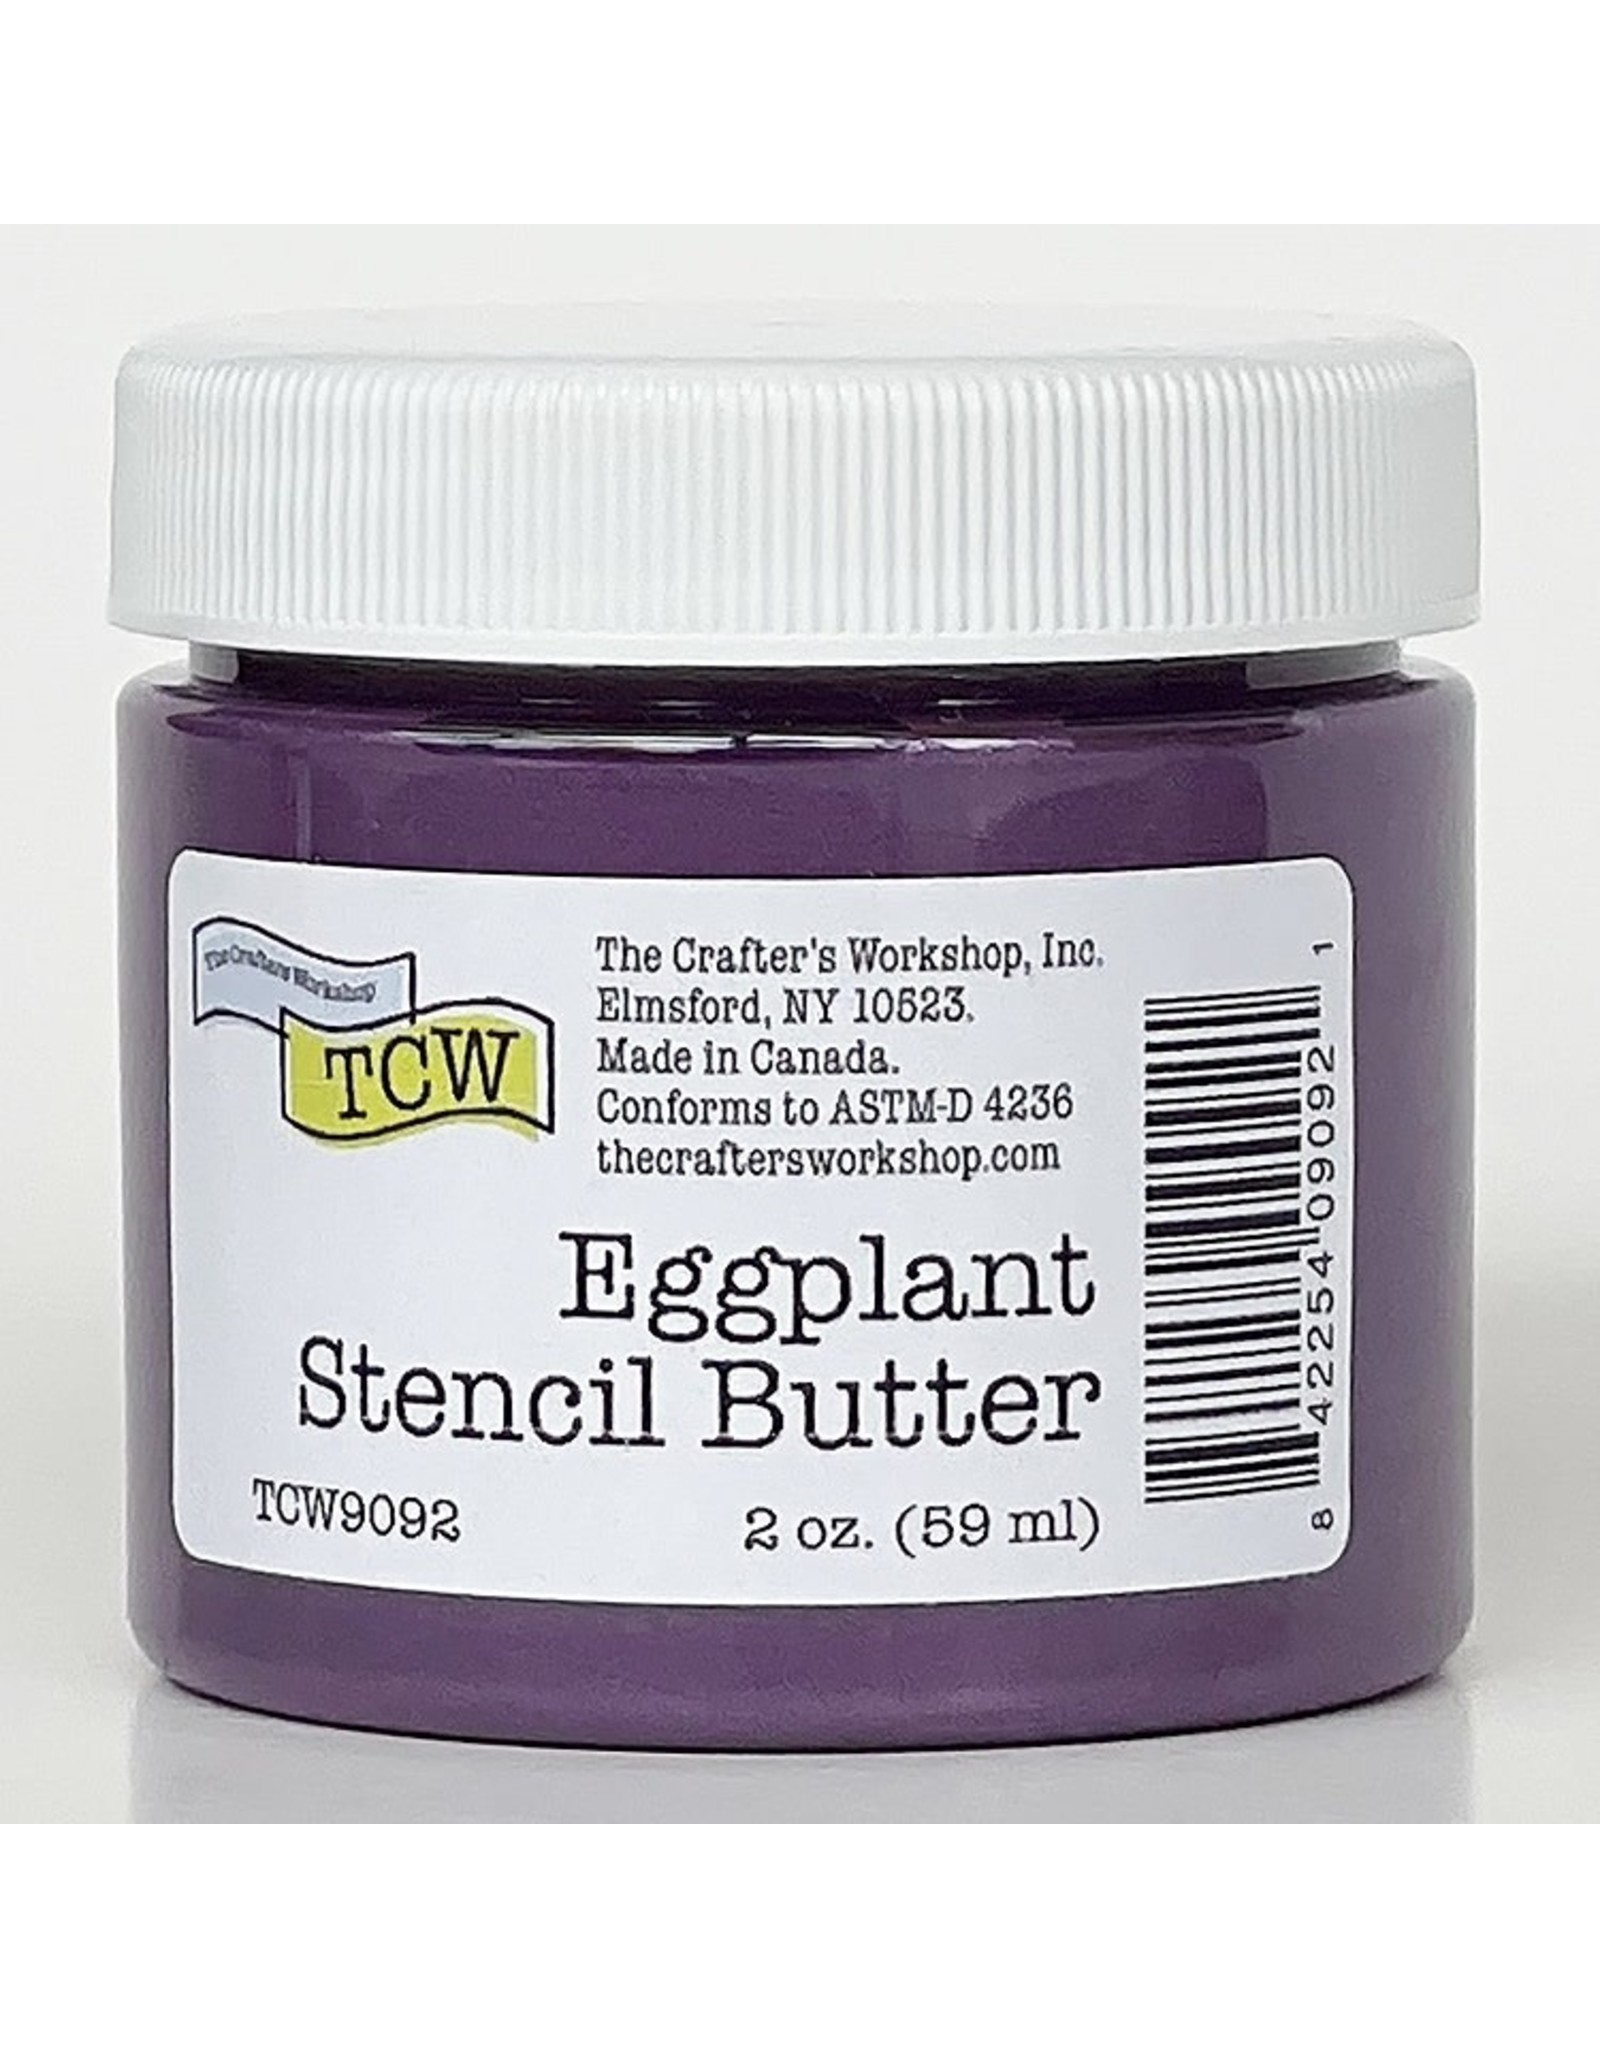 THE CRAFTERS WORKSHOP Stencil Butter 2 oz. - Eggplant